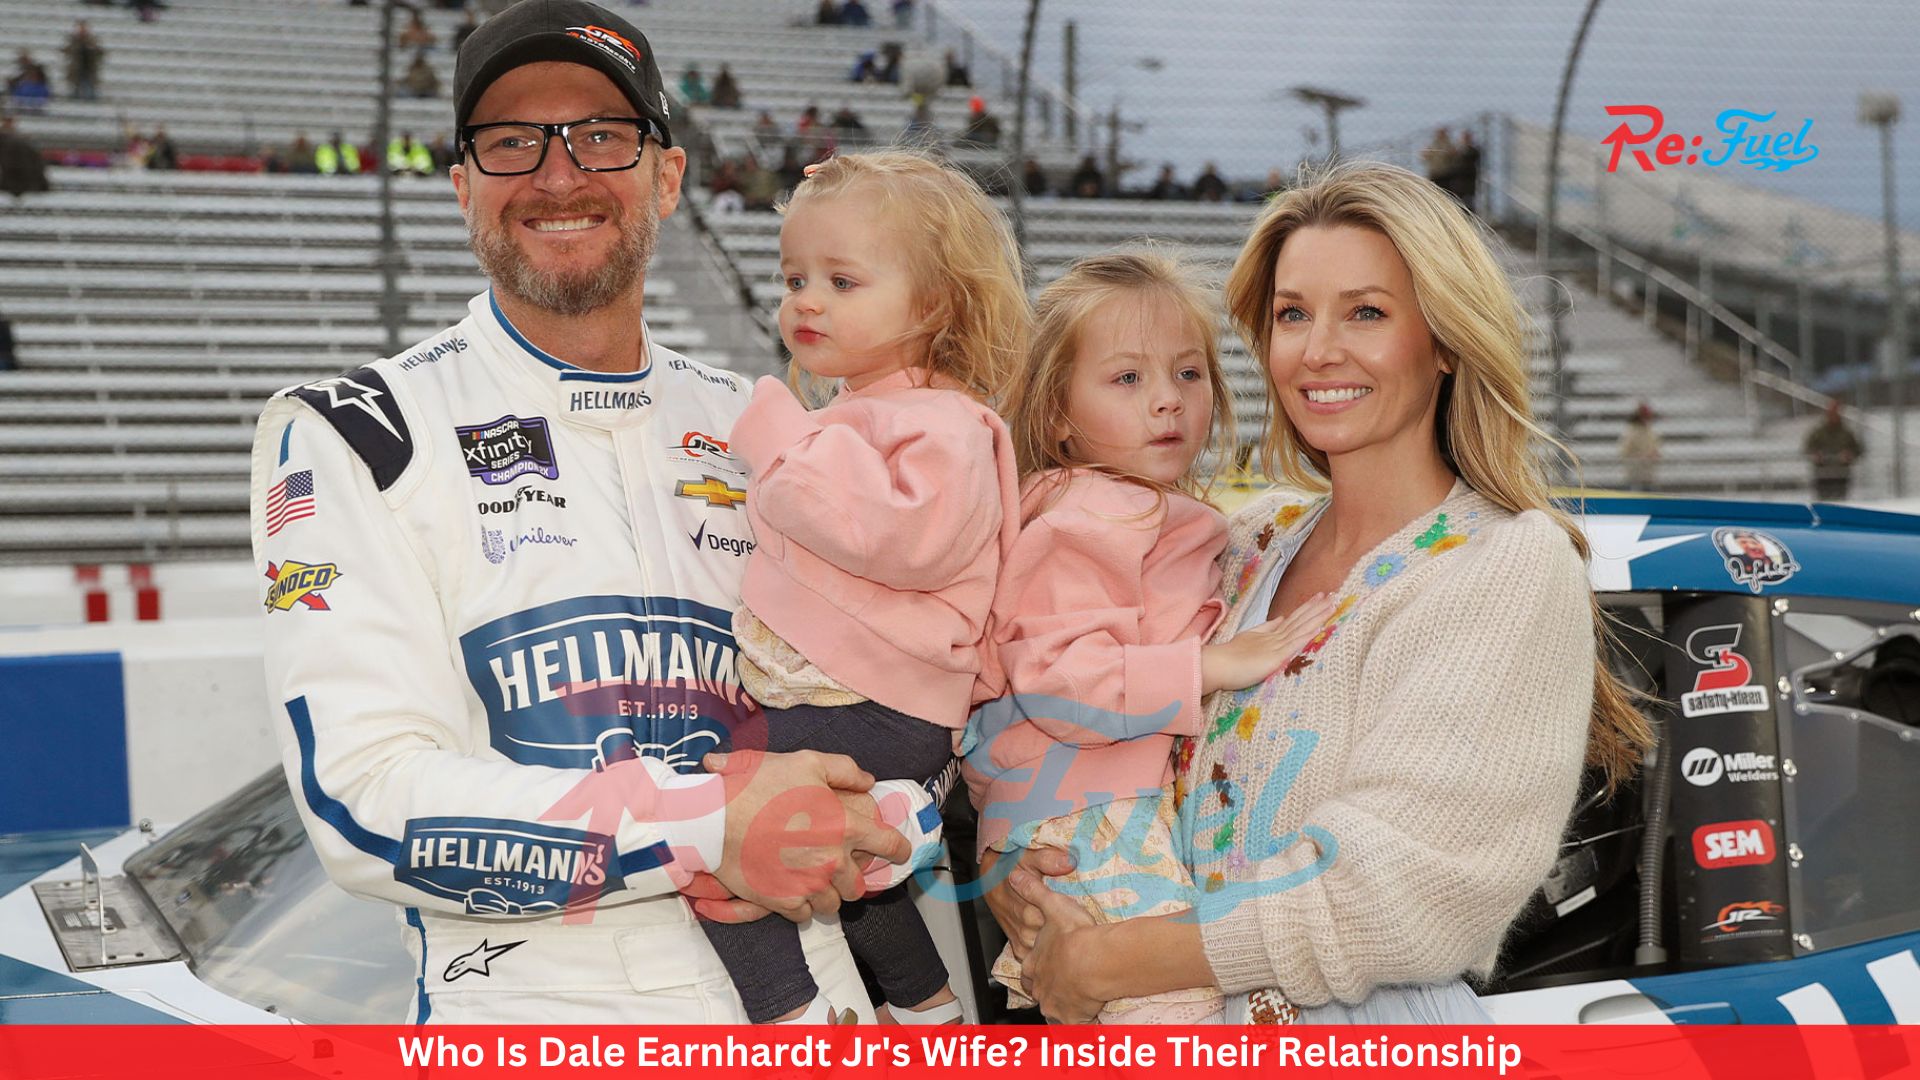 Who Is Dale Earnhardt Jr's Wife? Inside Their Relationship